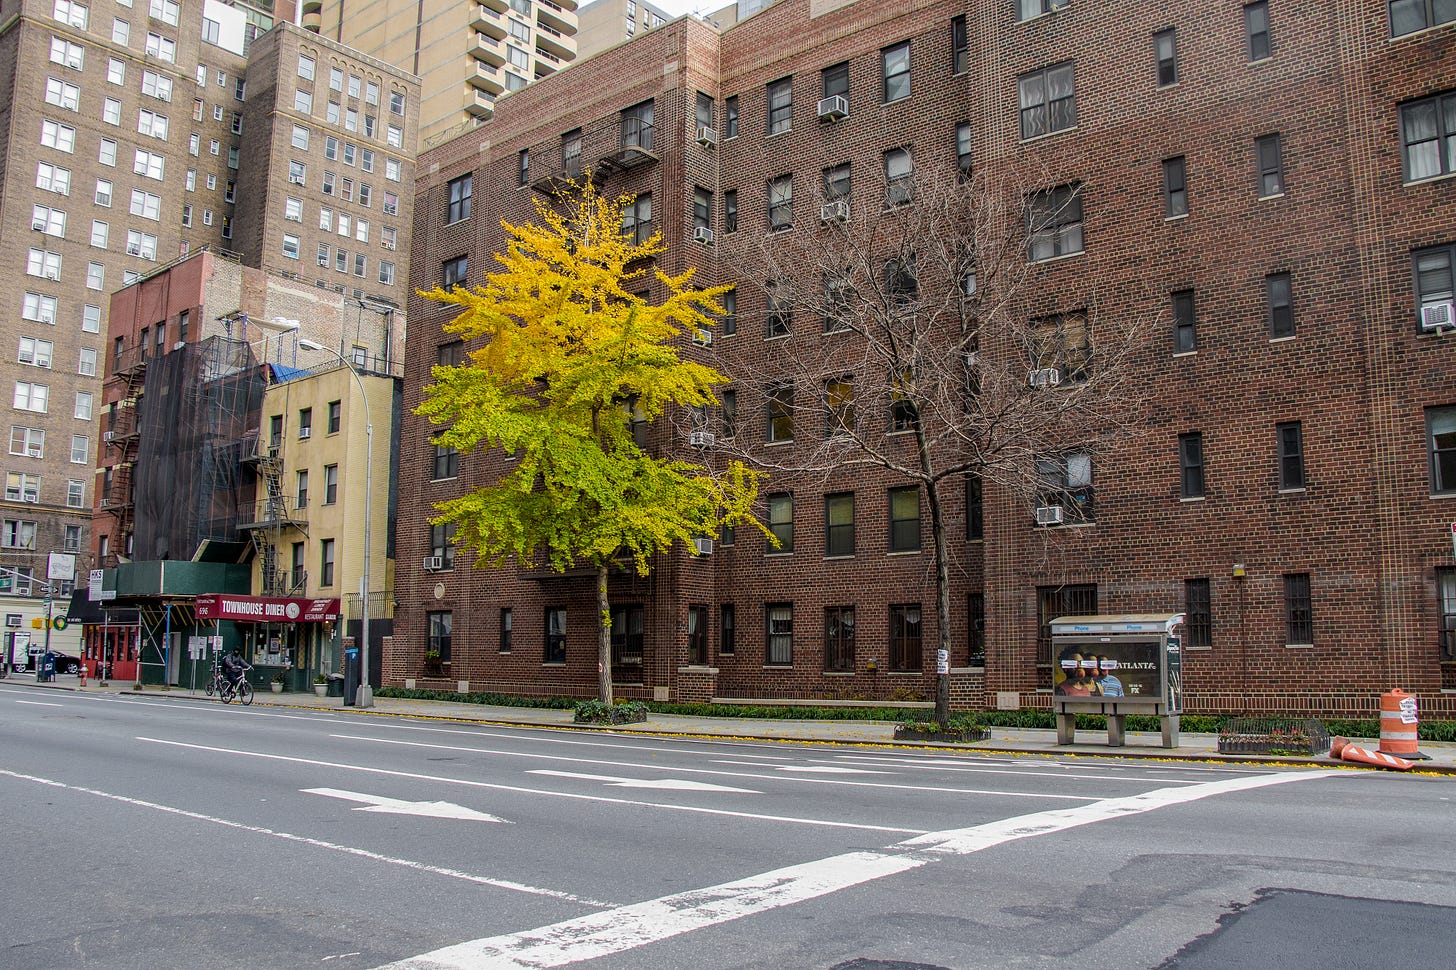 a photo of a street in new york city with one tree in full green/yellow bloom and one tree completely bare